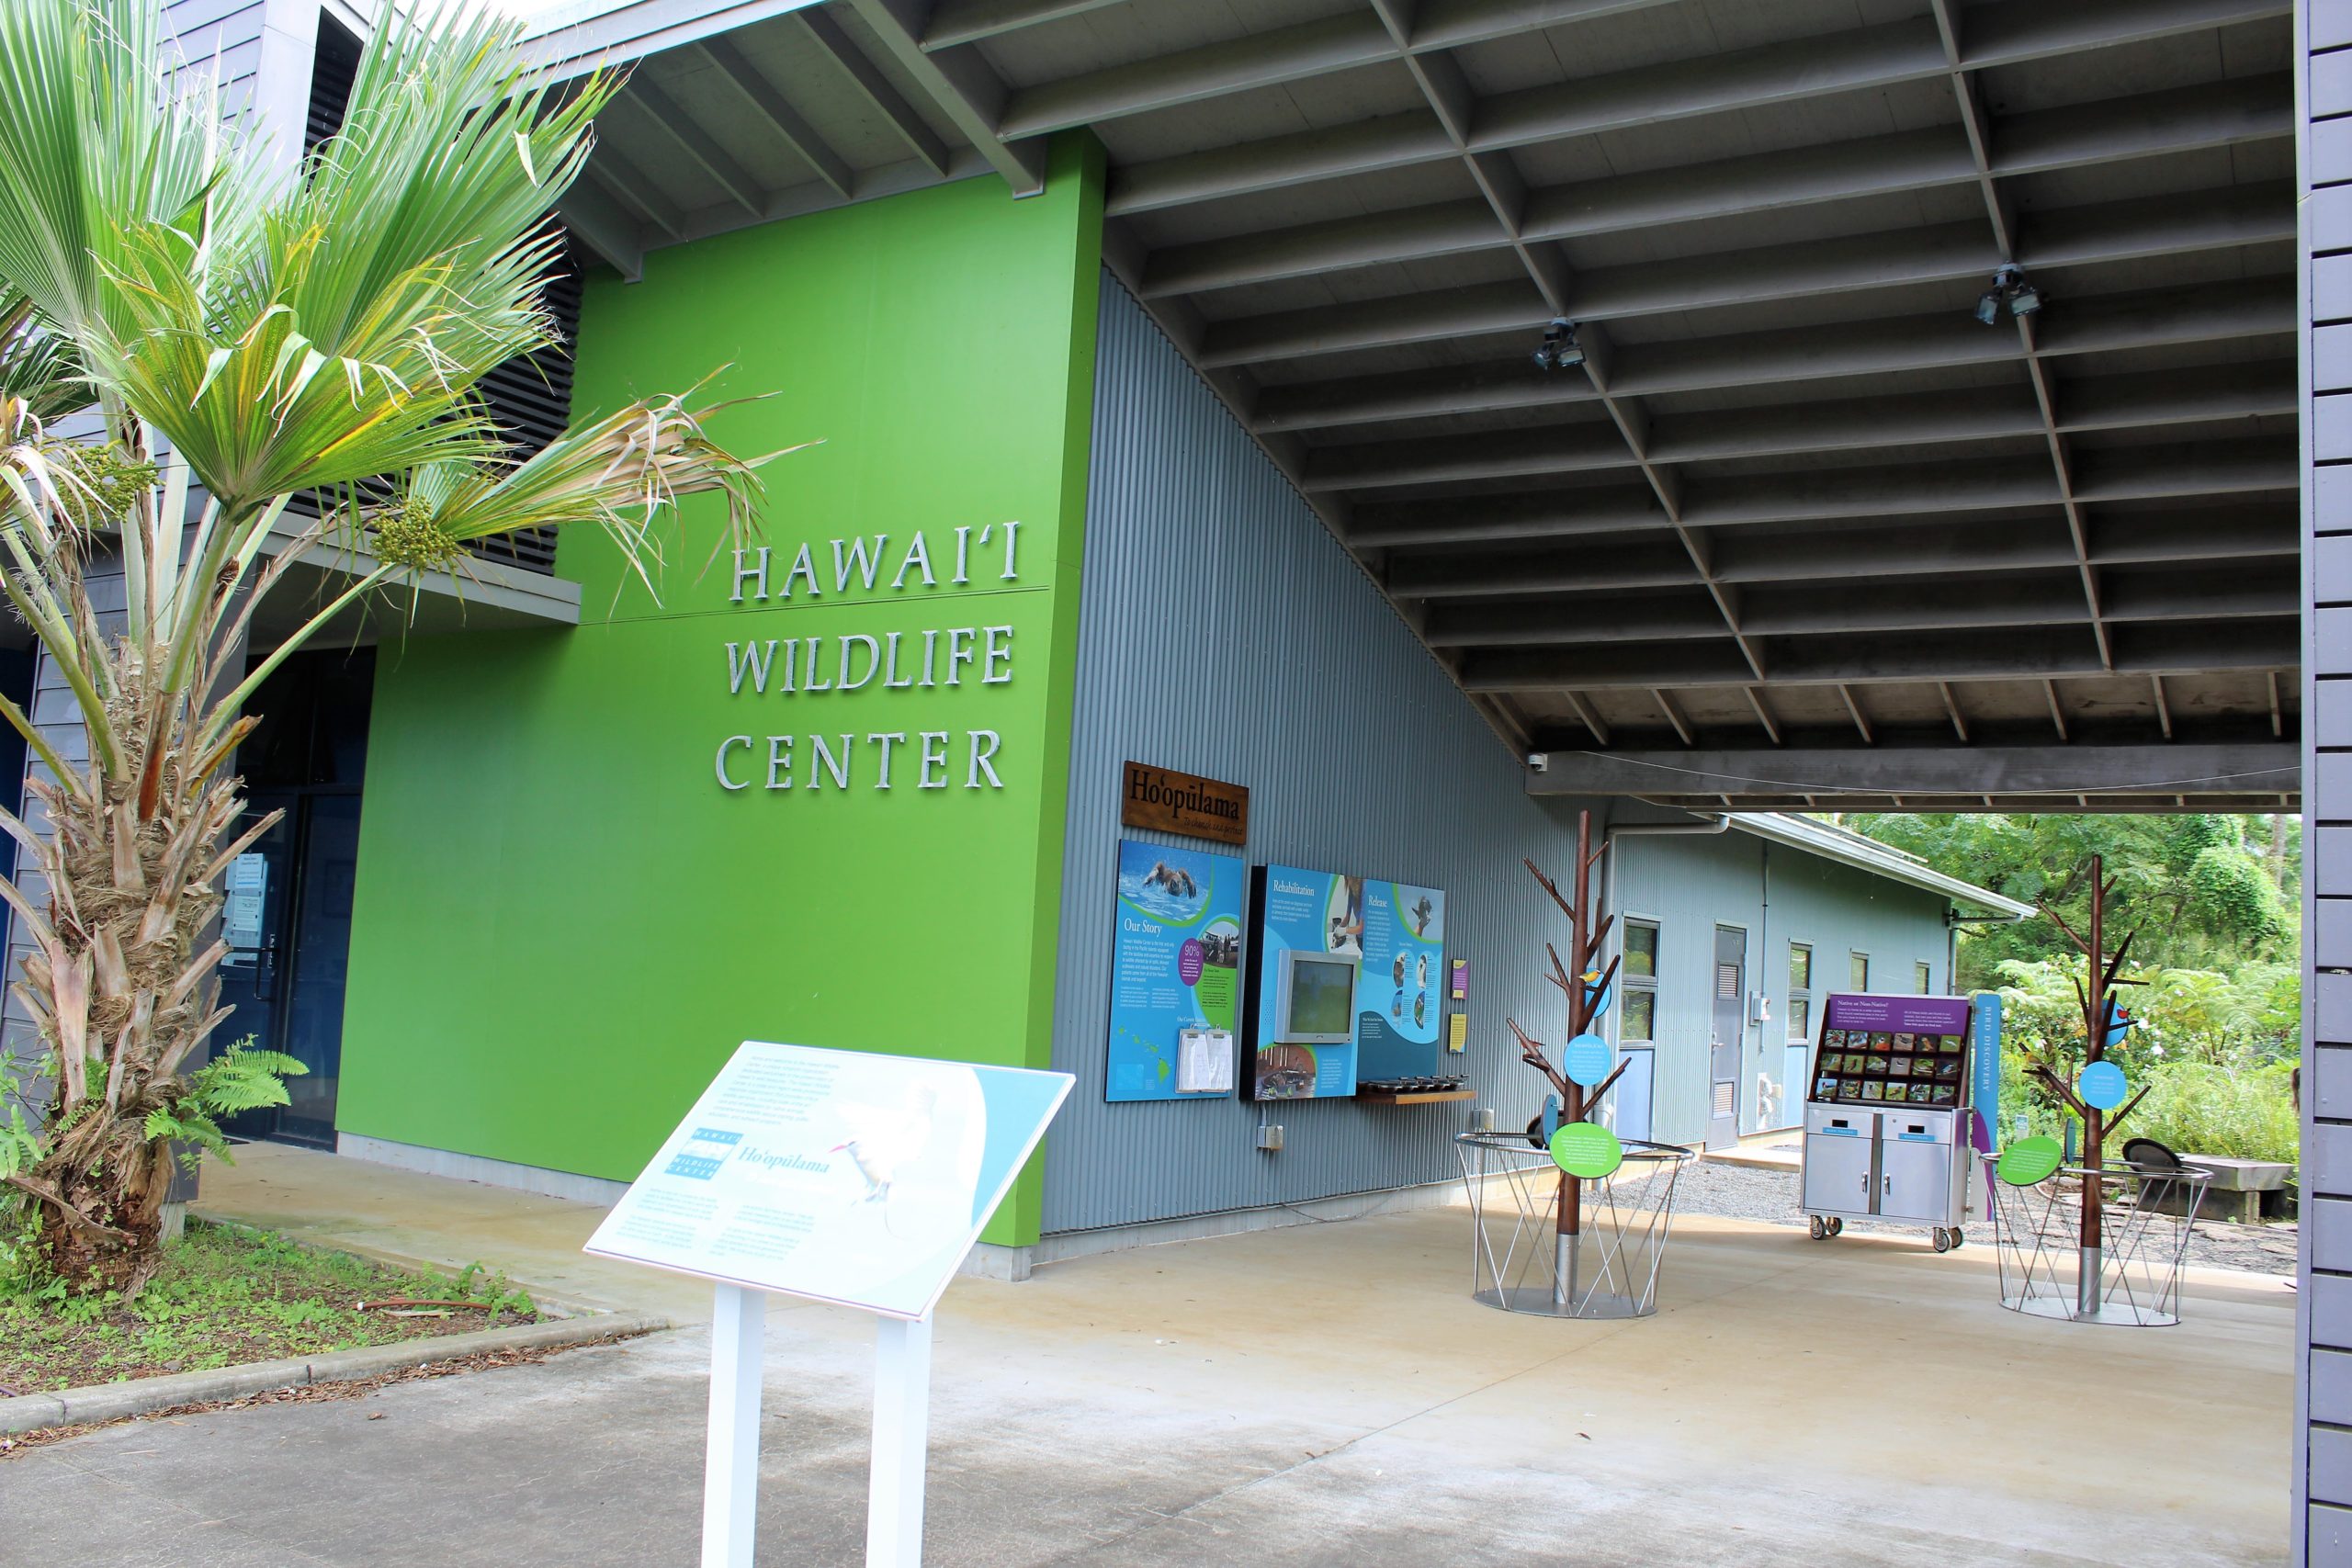 We recently discovered Hawai'i Wildlife Center when looking for ways we could volunteer during our vacation on the Big Island. This amazing facility rehabilitates native Hawaiian birds, and the Hoary Bat, for release back into the wild. We are excited to tell you about our time spent exploring and to share with you how our family was able to give back to help the animals. We hope you'll consider stopping by Hawaii Wildlife Center if you are ever on the Big Island. We are so glad we did!